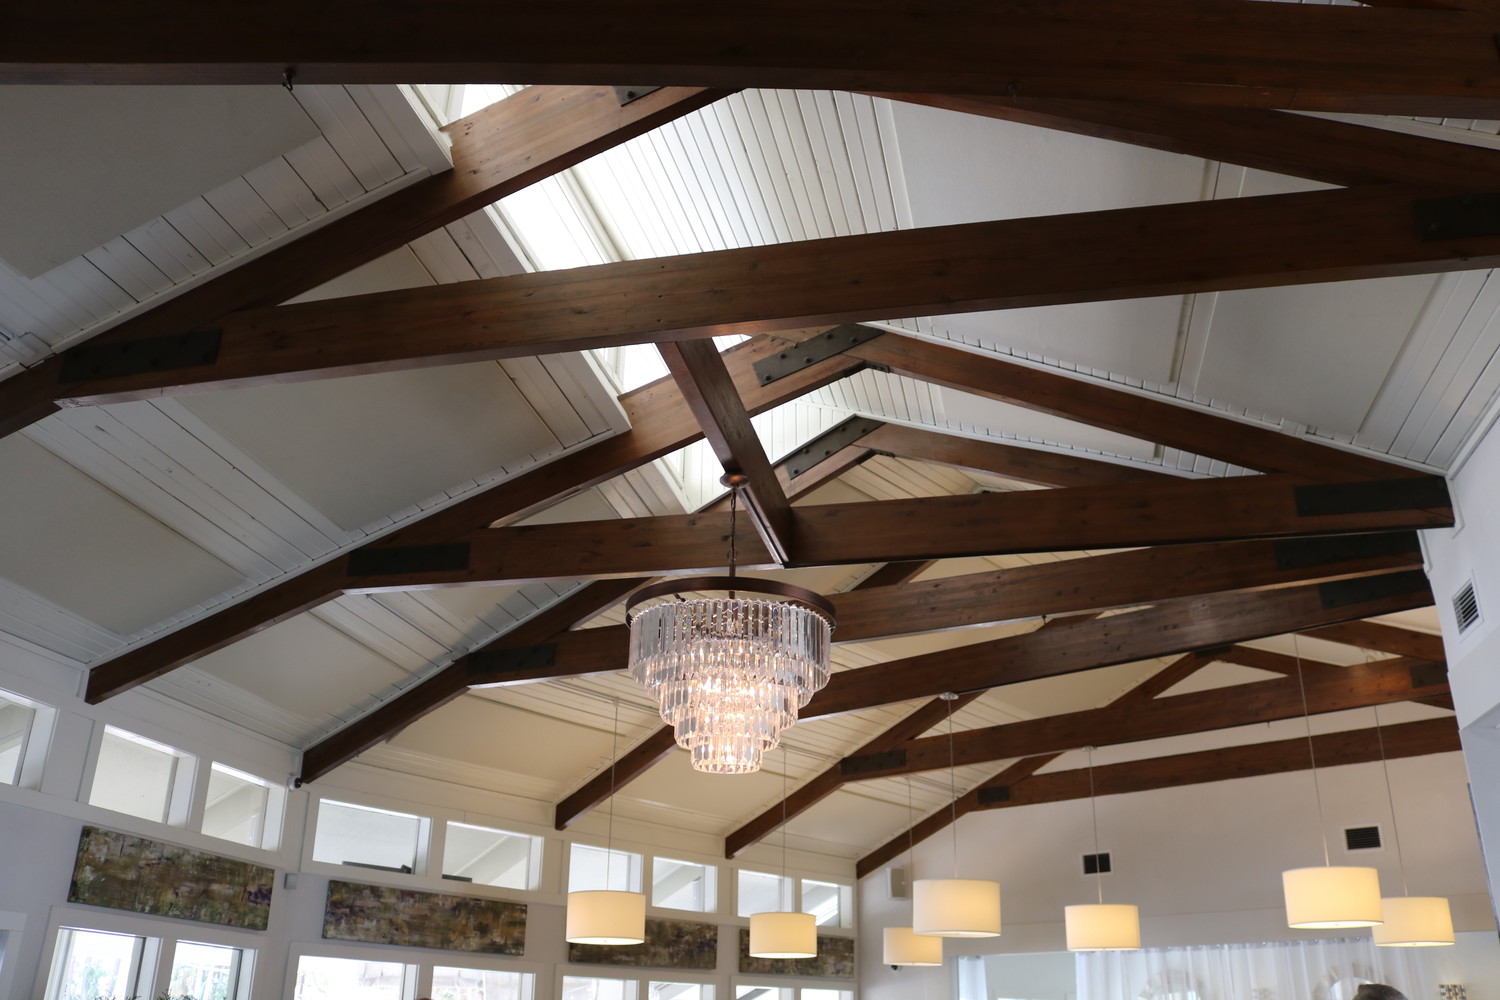 The ceiling panels implemented to reduce noise in the restaurant